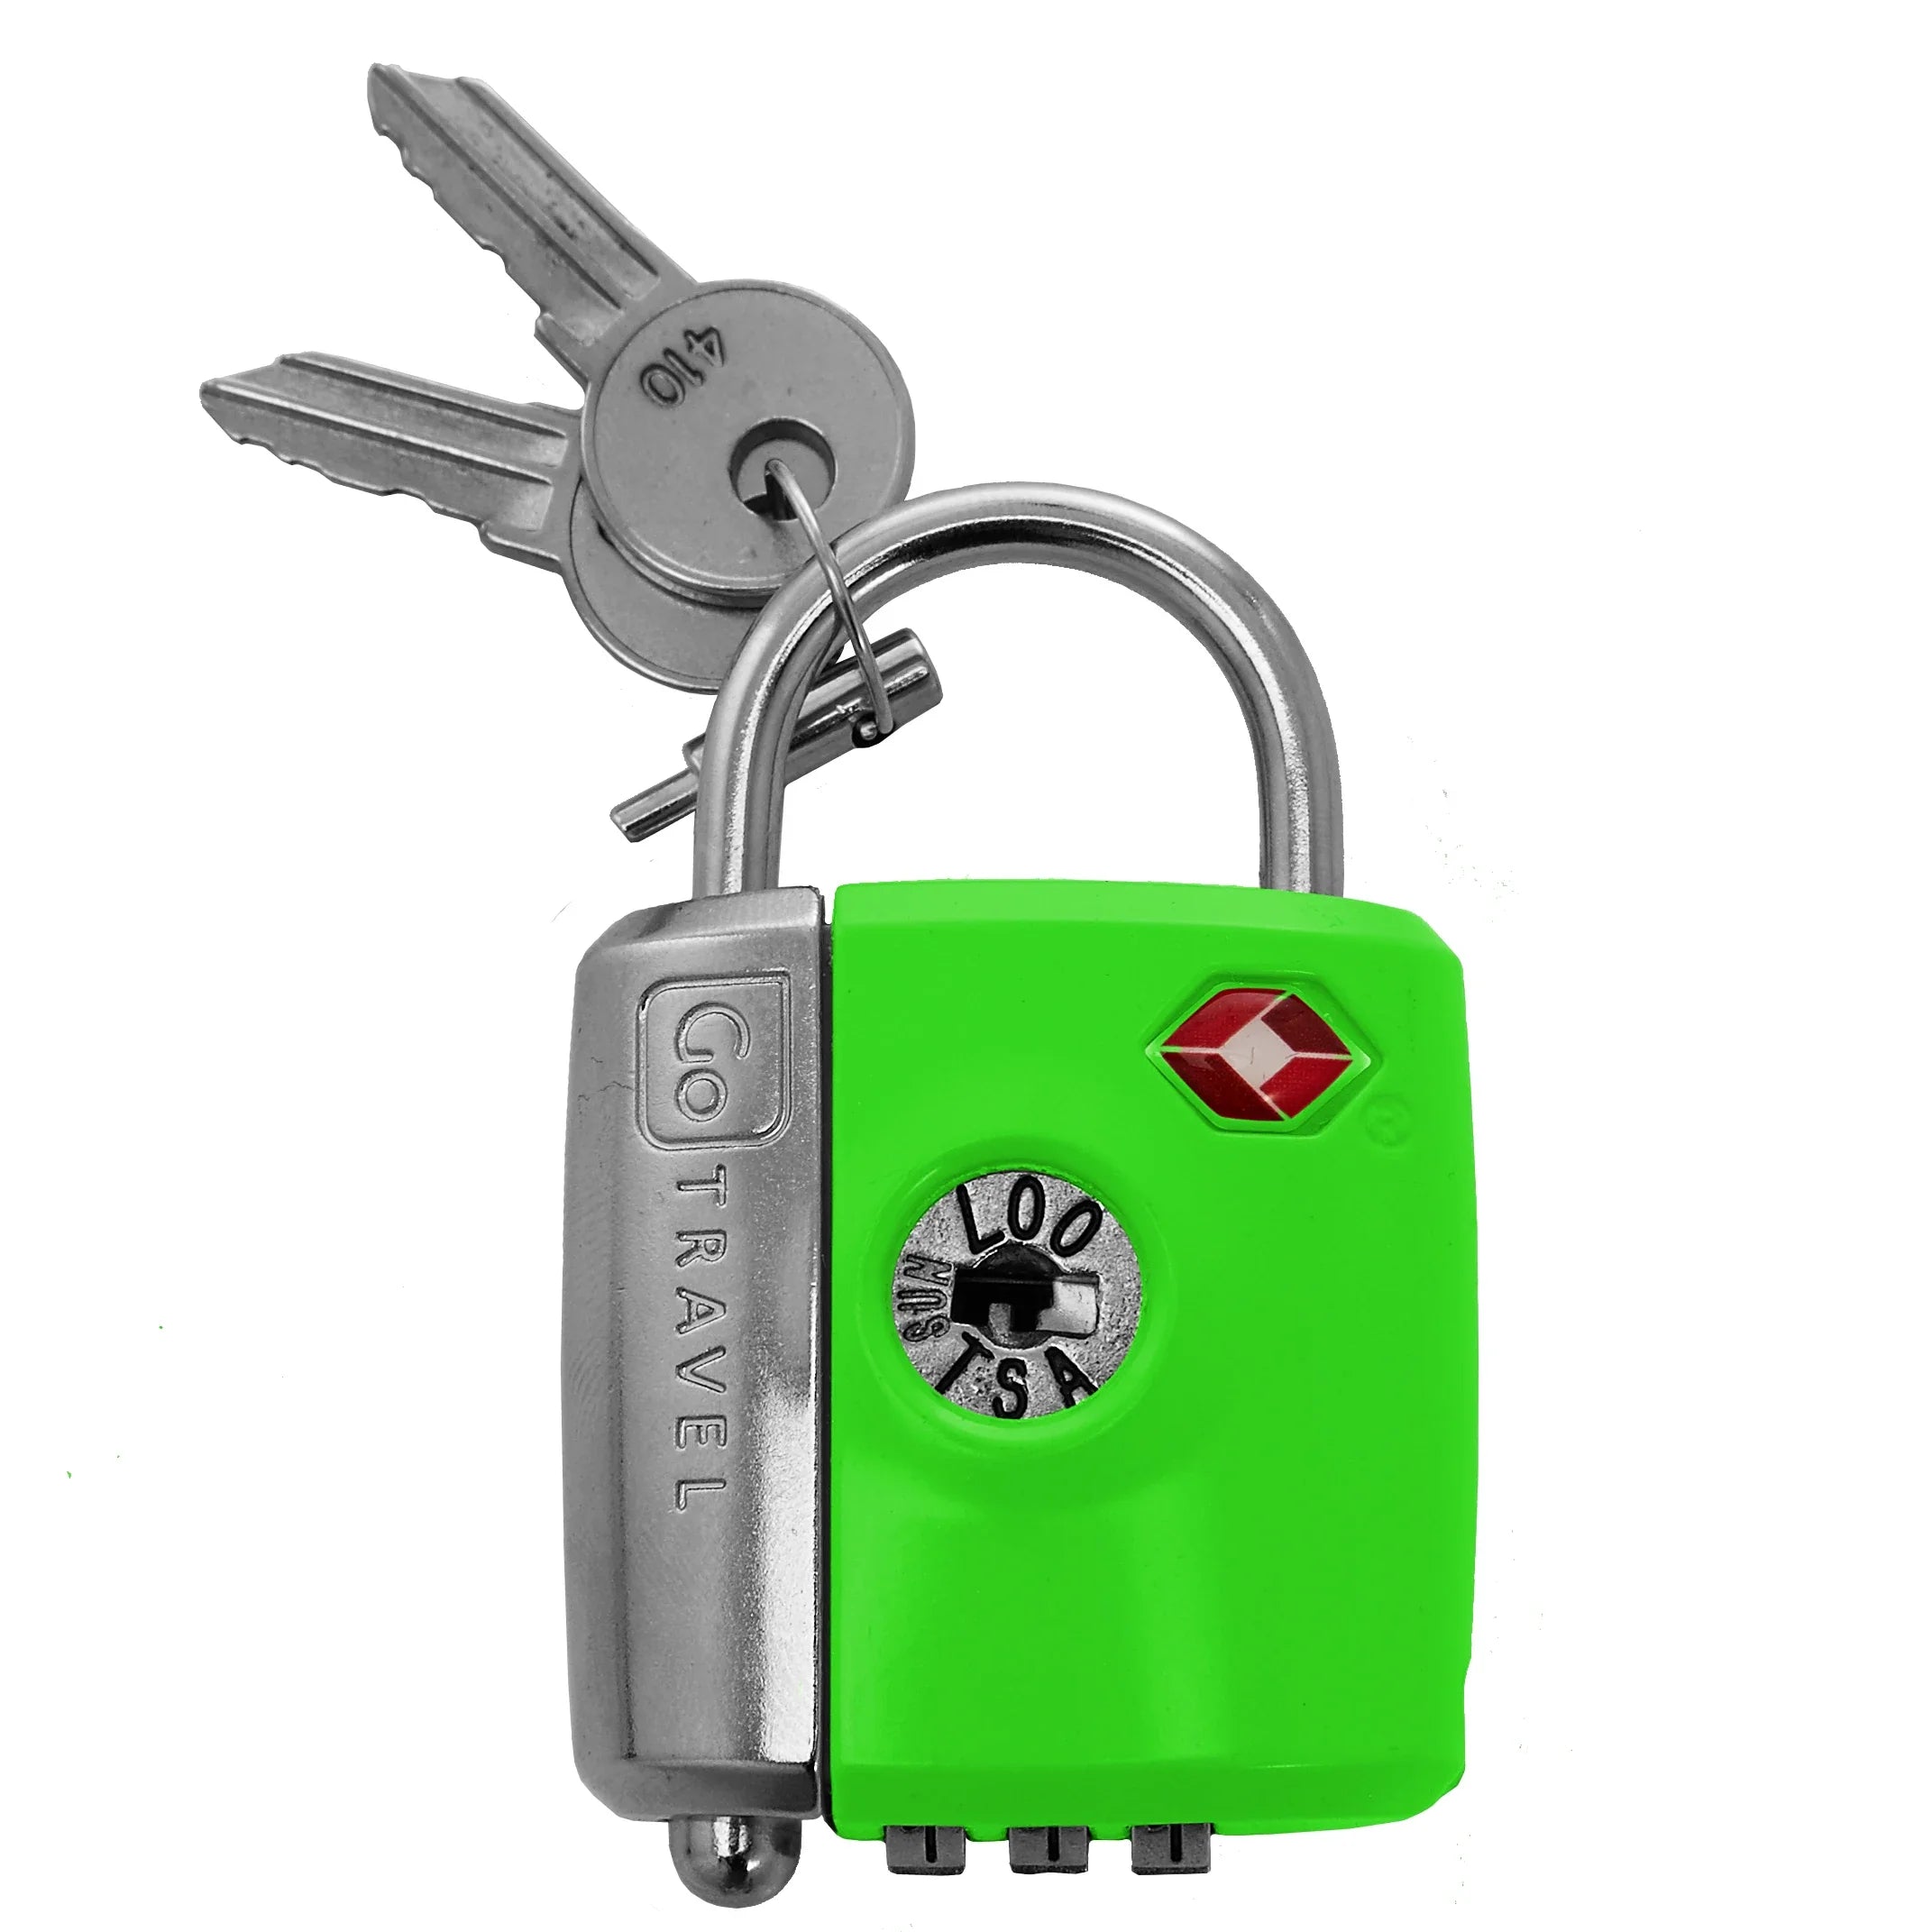 Design Go travel accessories lock with key and number combination - light green